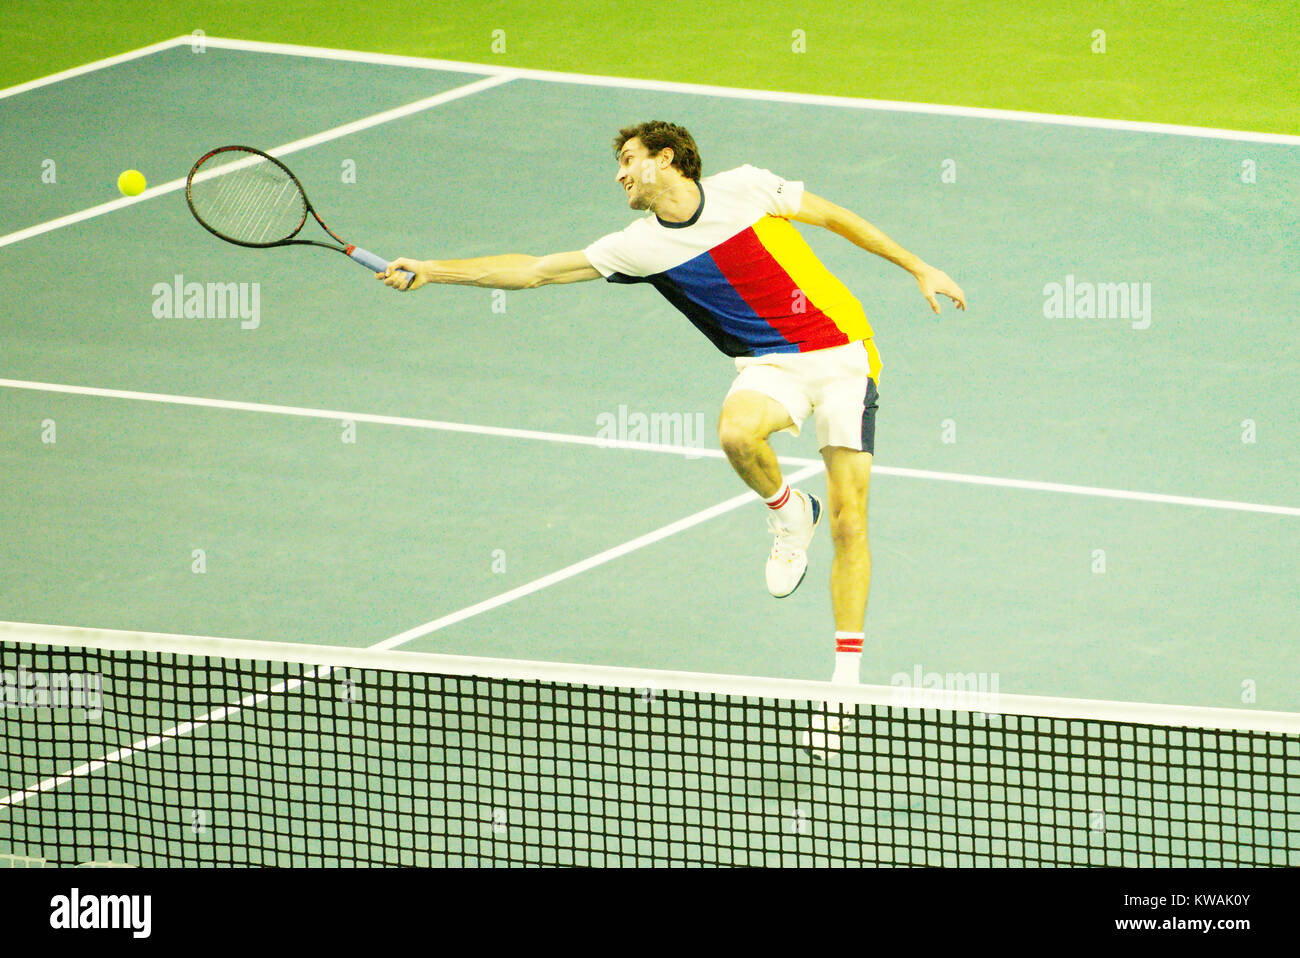 Pune, India. 1st January 2018. Gilles Simon of France in action in the first round of Singles competition at Tata Open Maharashtra at the Mahalunge Balewadi Tennis Stadium in Pune, India. Credit: Karunesh Johri/Alamy Live News. Stock Photo